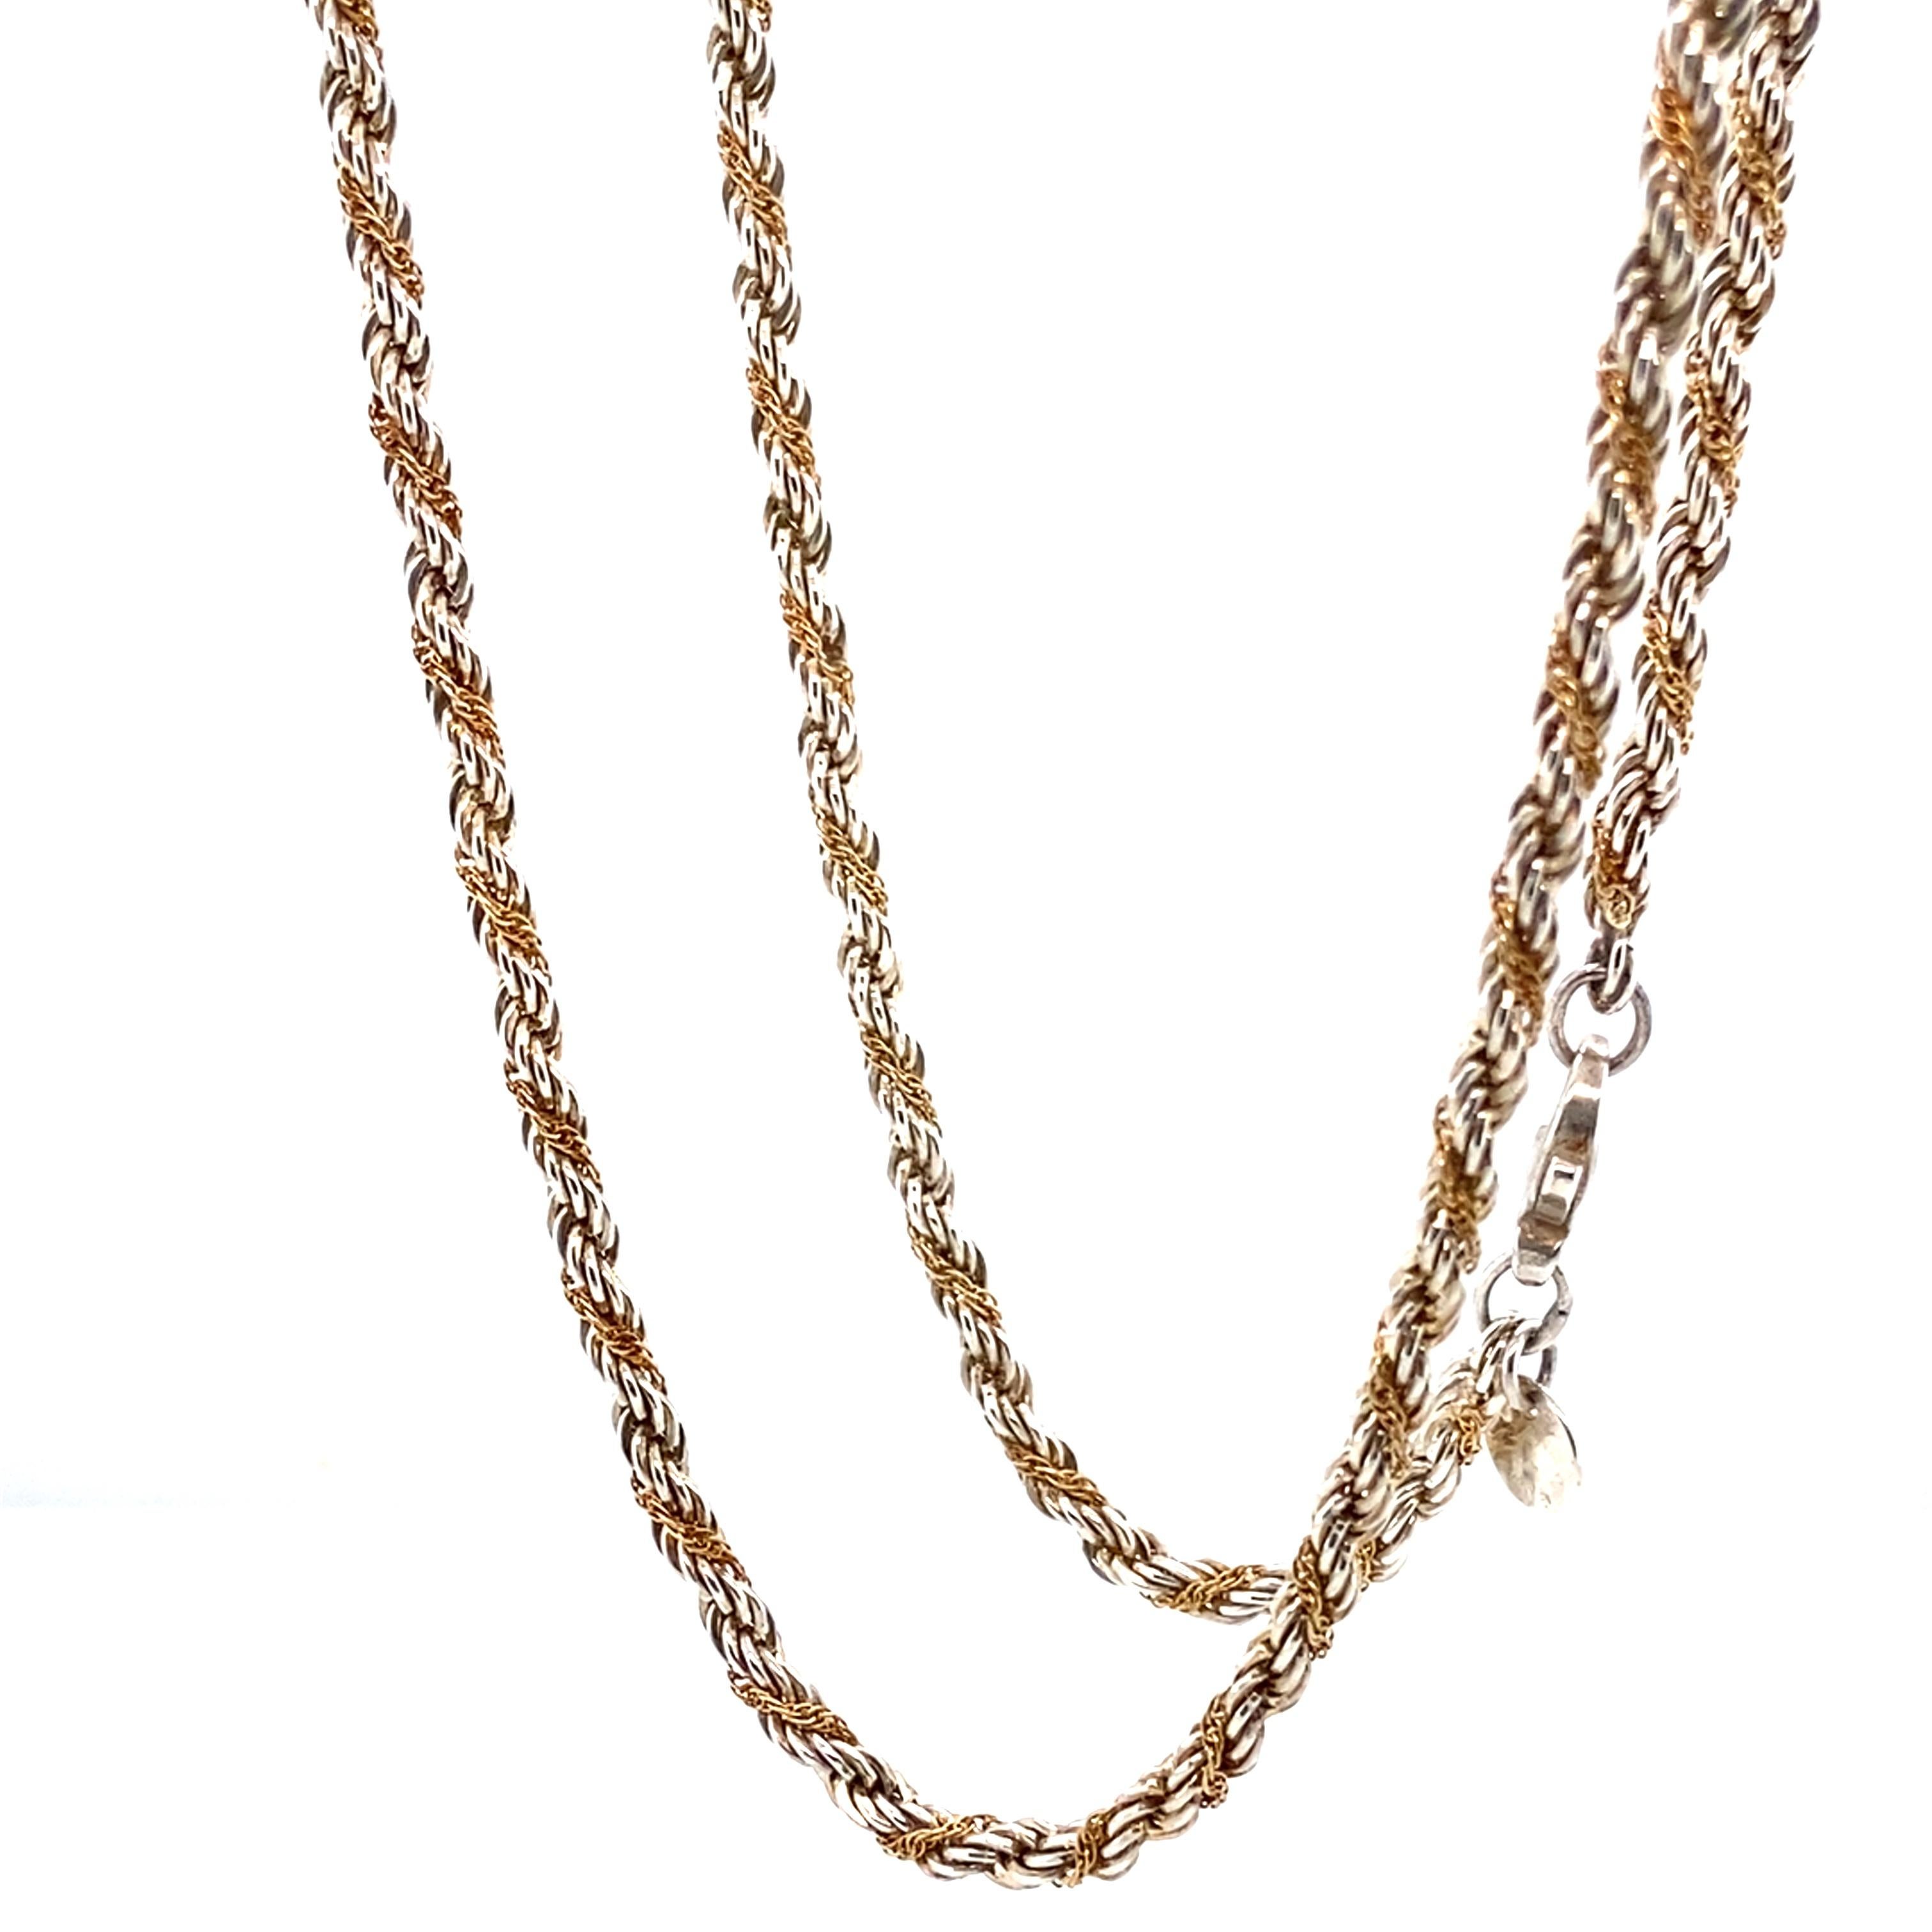 Item Details: 
Metal: Sterling Silver and 18 karat yellow gold 
Weight: 15.3 grams 
Measurements: 18 inches long 

Item Features: 
This stunning Tiffany & Company Rope Chain intertwines with a beautiful mix of 18 karat yellow gold and sterling